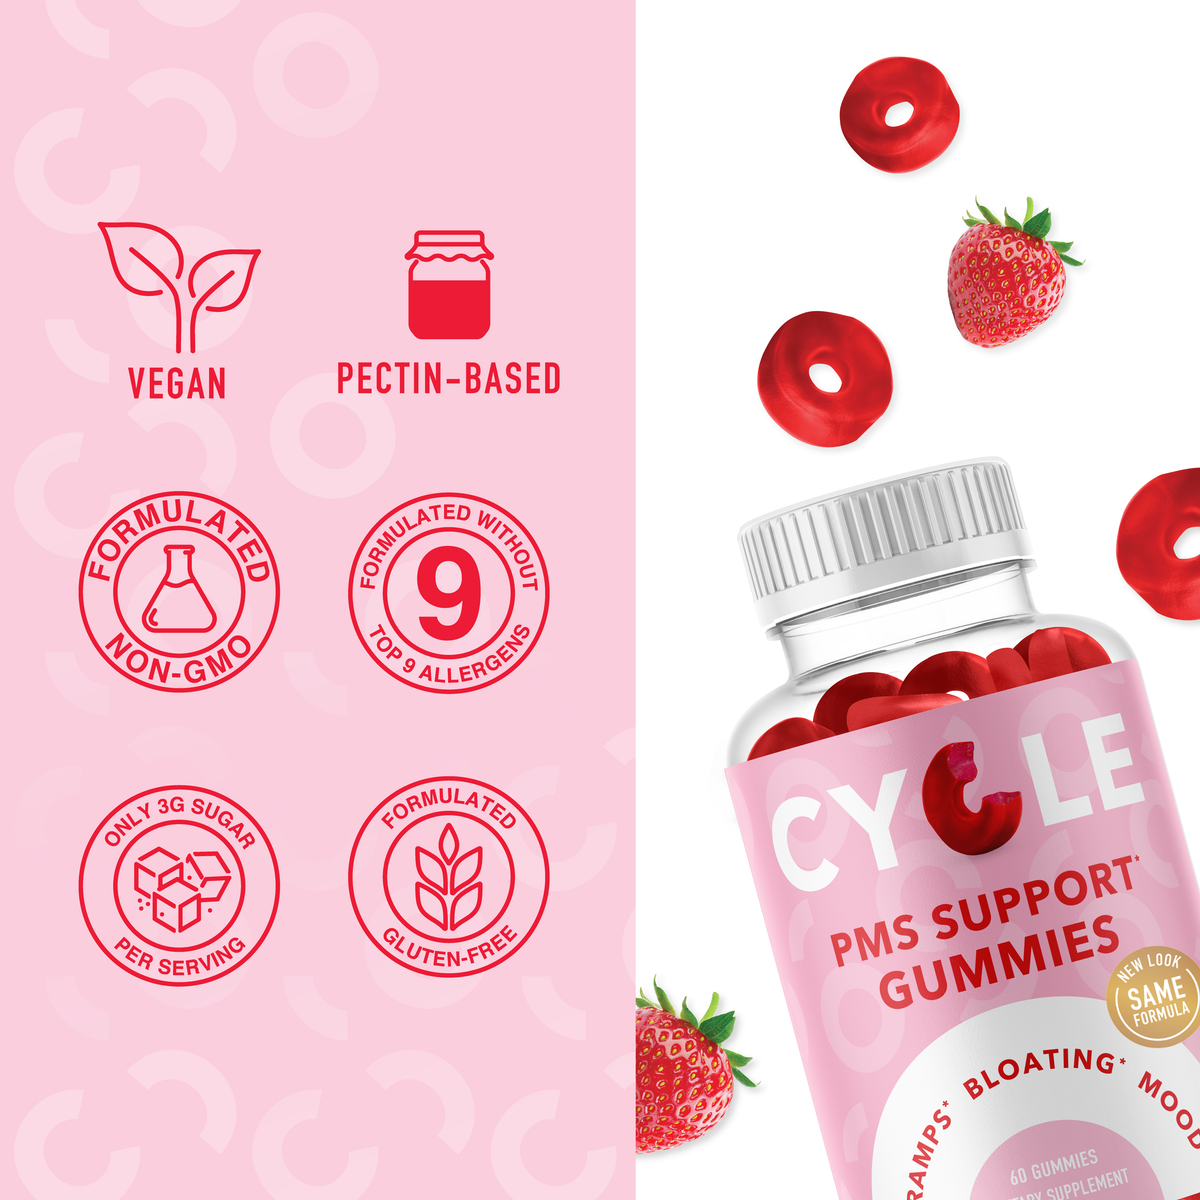 CYCLE PMS Relief Gummies, 60 Ct.